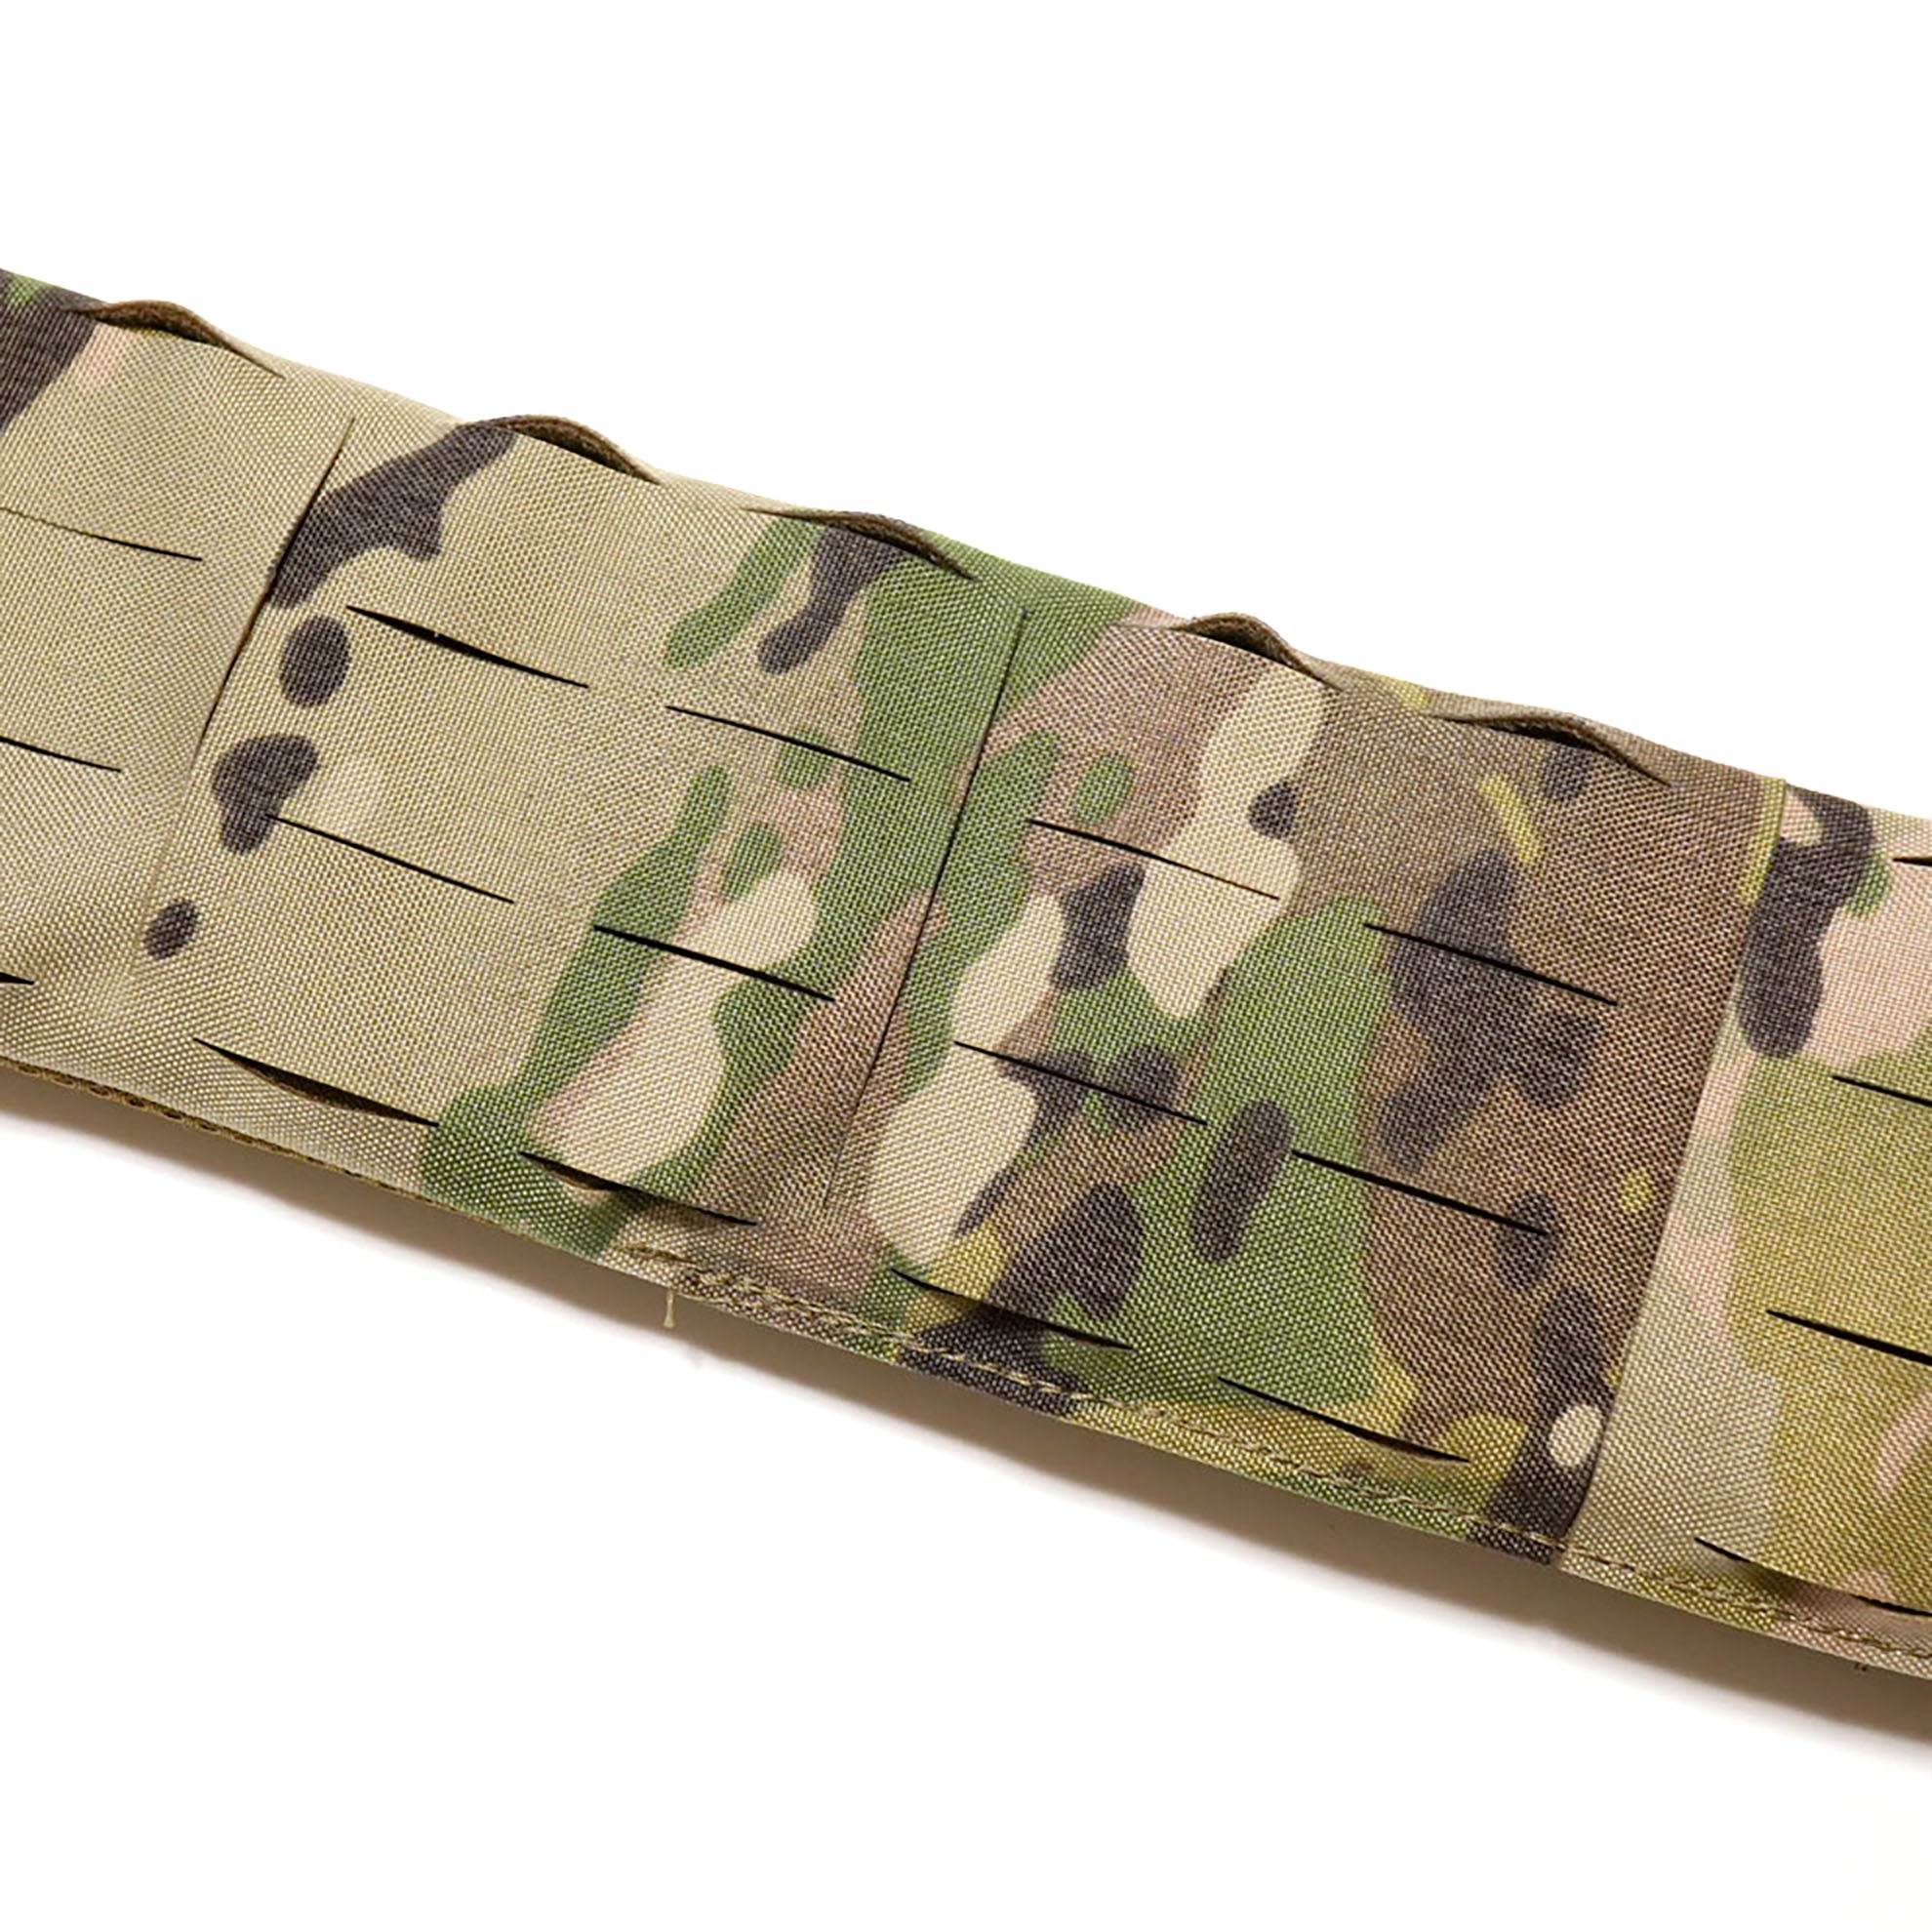 First Spear Padded AGB Sleeve 6/12 LOW PROFILE – geartles